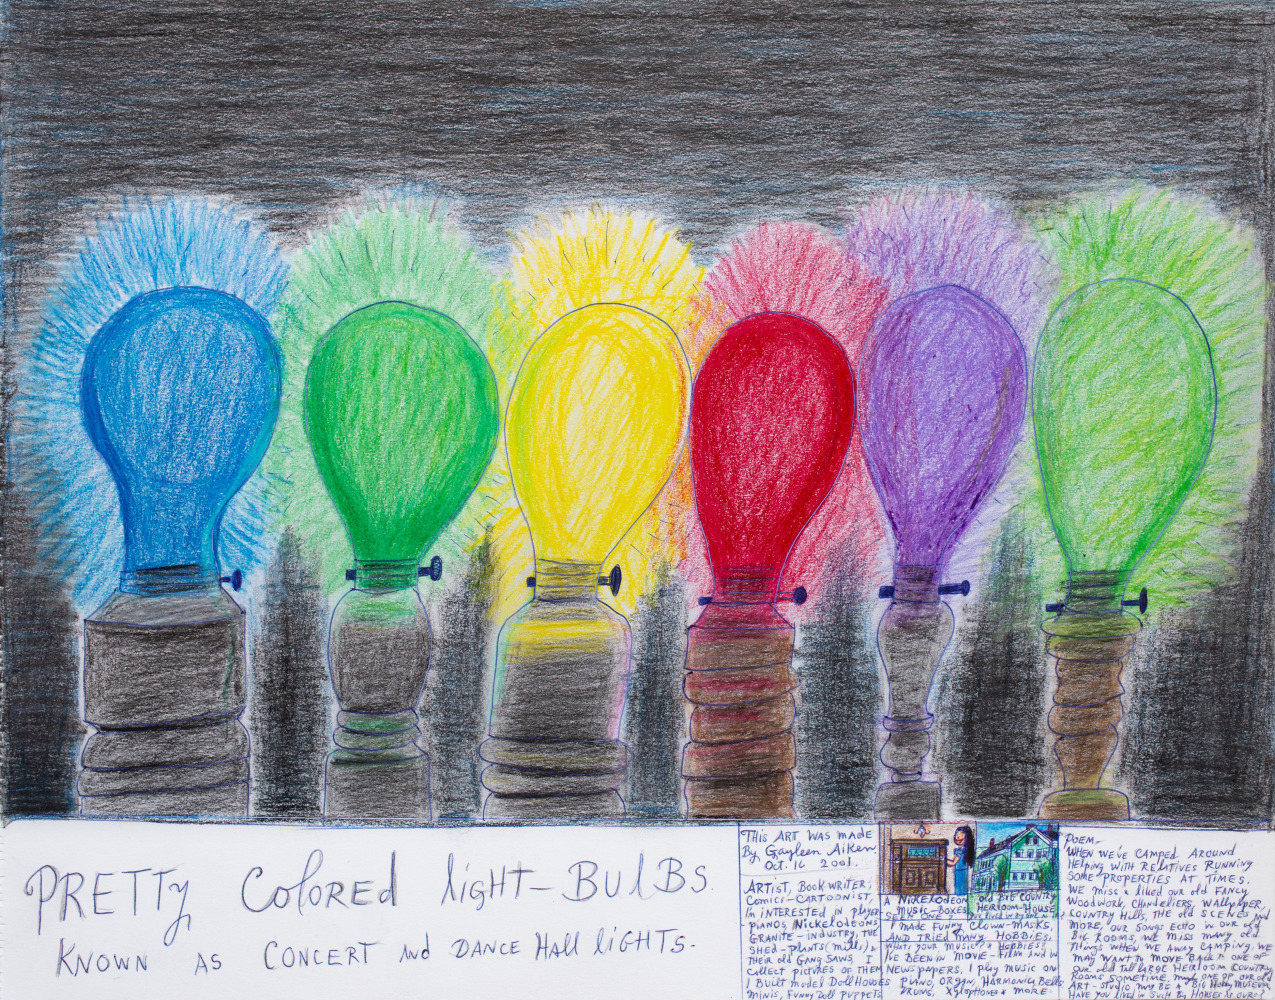 Pretty colored light-bulbs. Known As Concert And Dance Hall lights, 2001
Colored pencil, ballpoint pen, and crayon on paper
11 x 14 inches